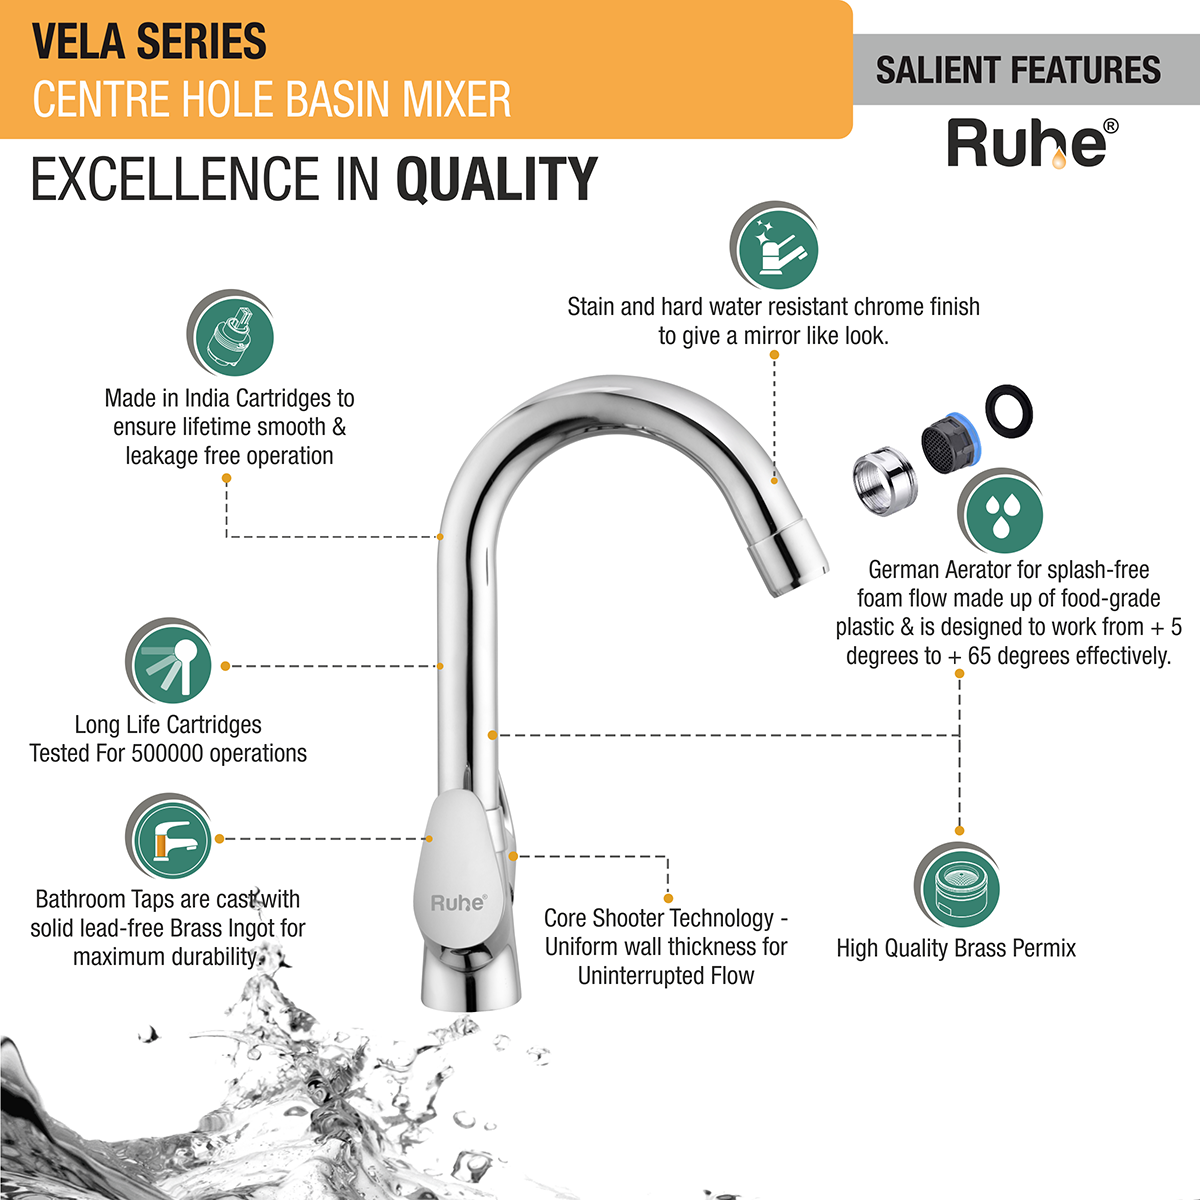 Vela Centre Hole Basin Mixer with Small (12 inches) Round Swivel Spout Faucet features